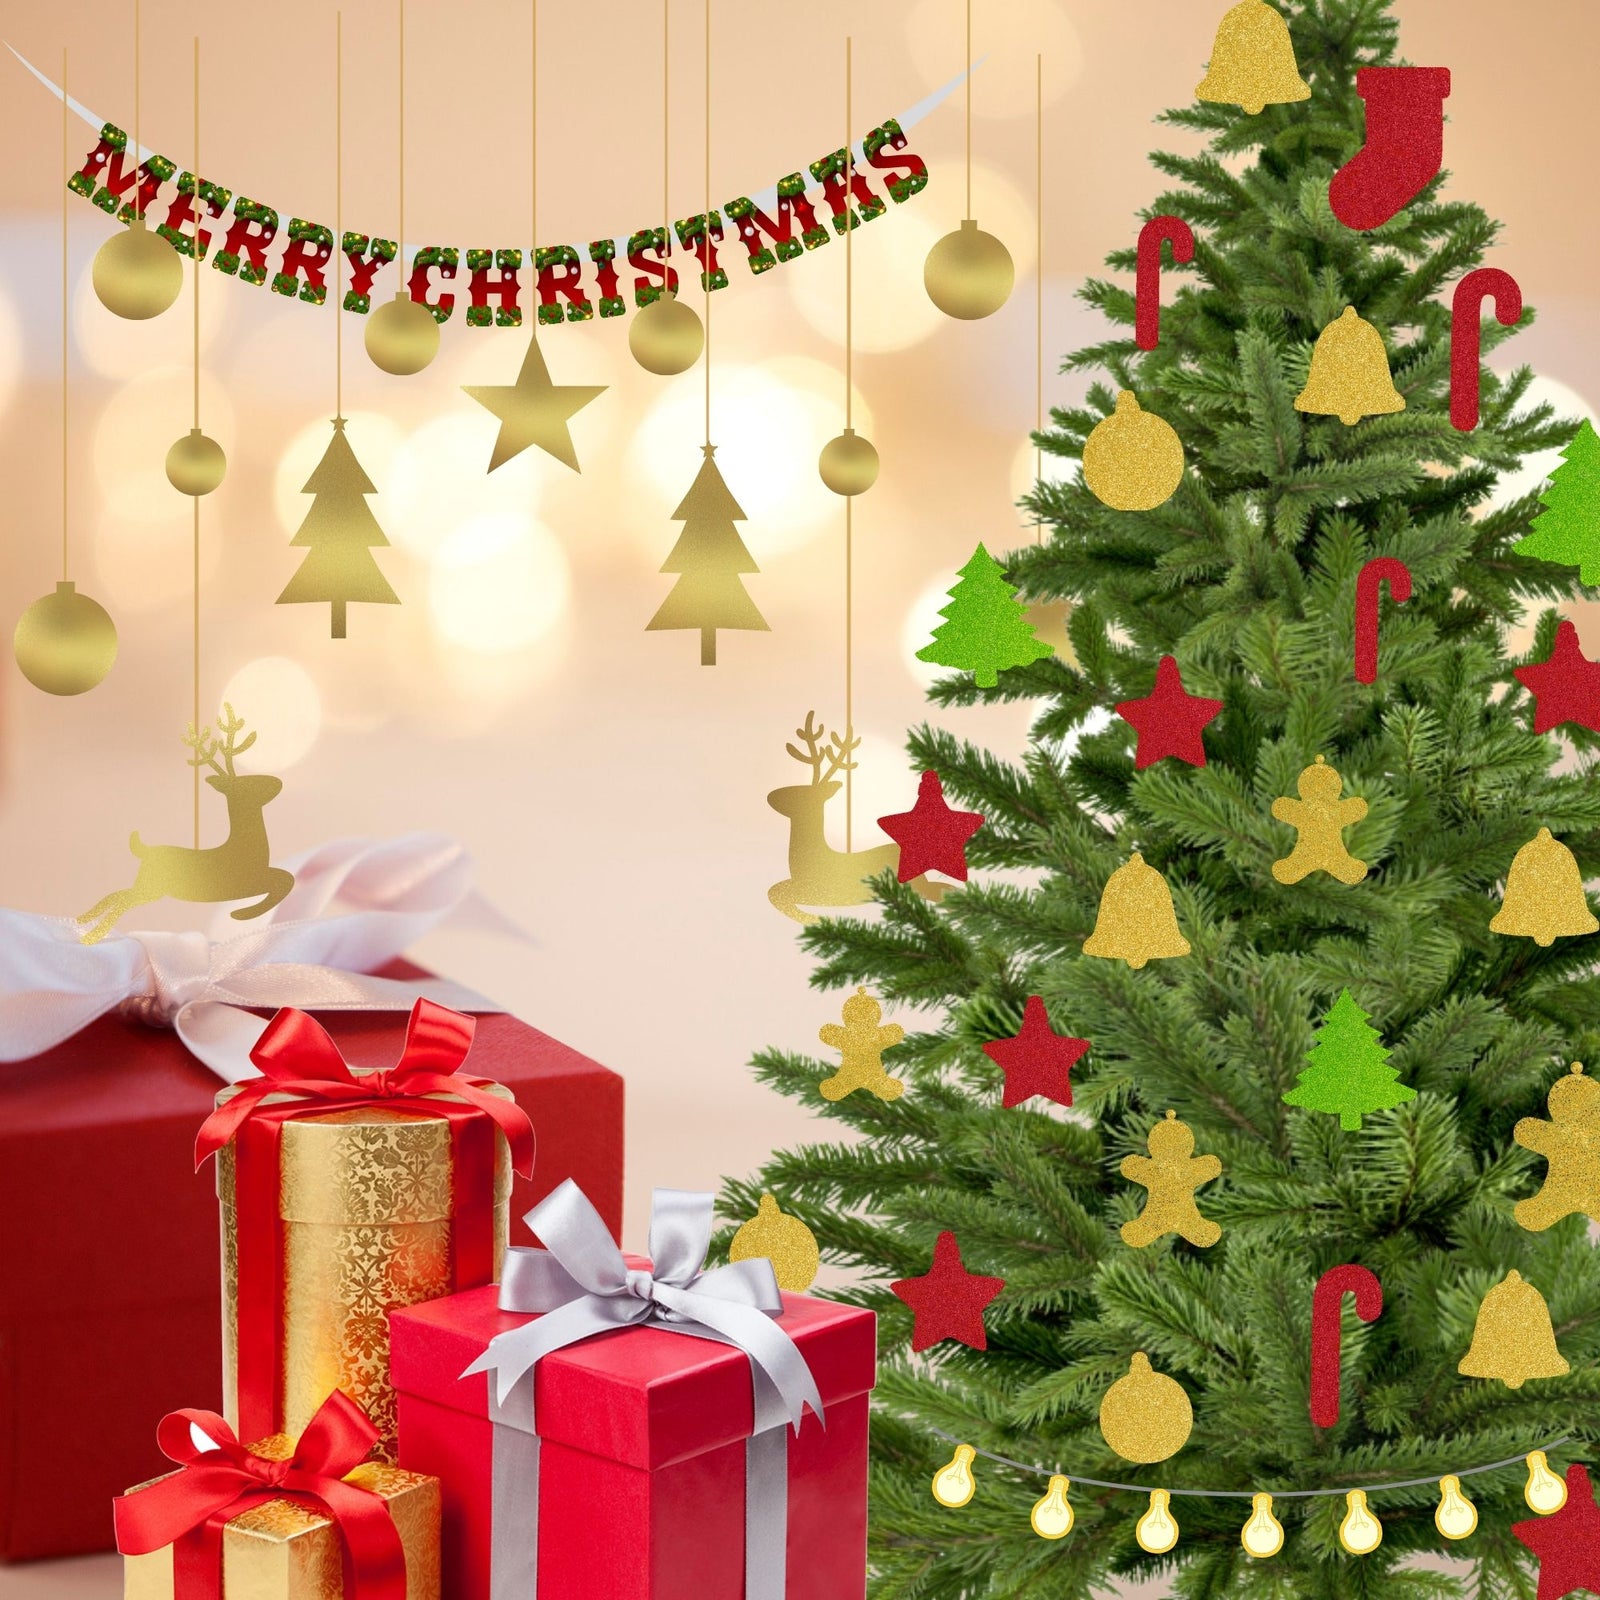 Merry Christmas Decoration Kit (5 Inches / 250 GSM Card Stock / Red, Green, Gold / 51 Pcs)